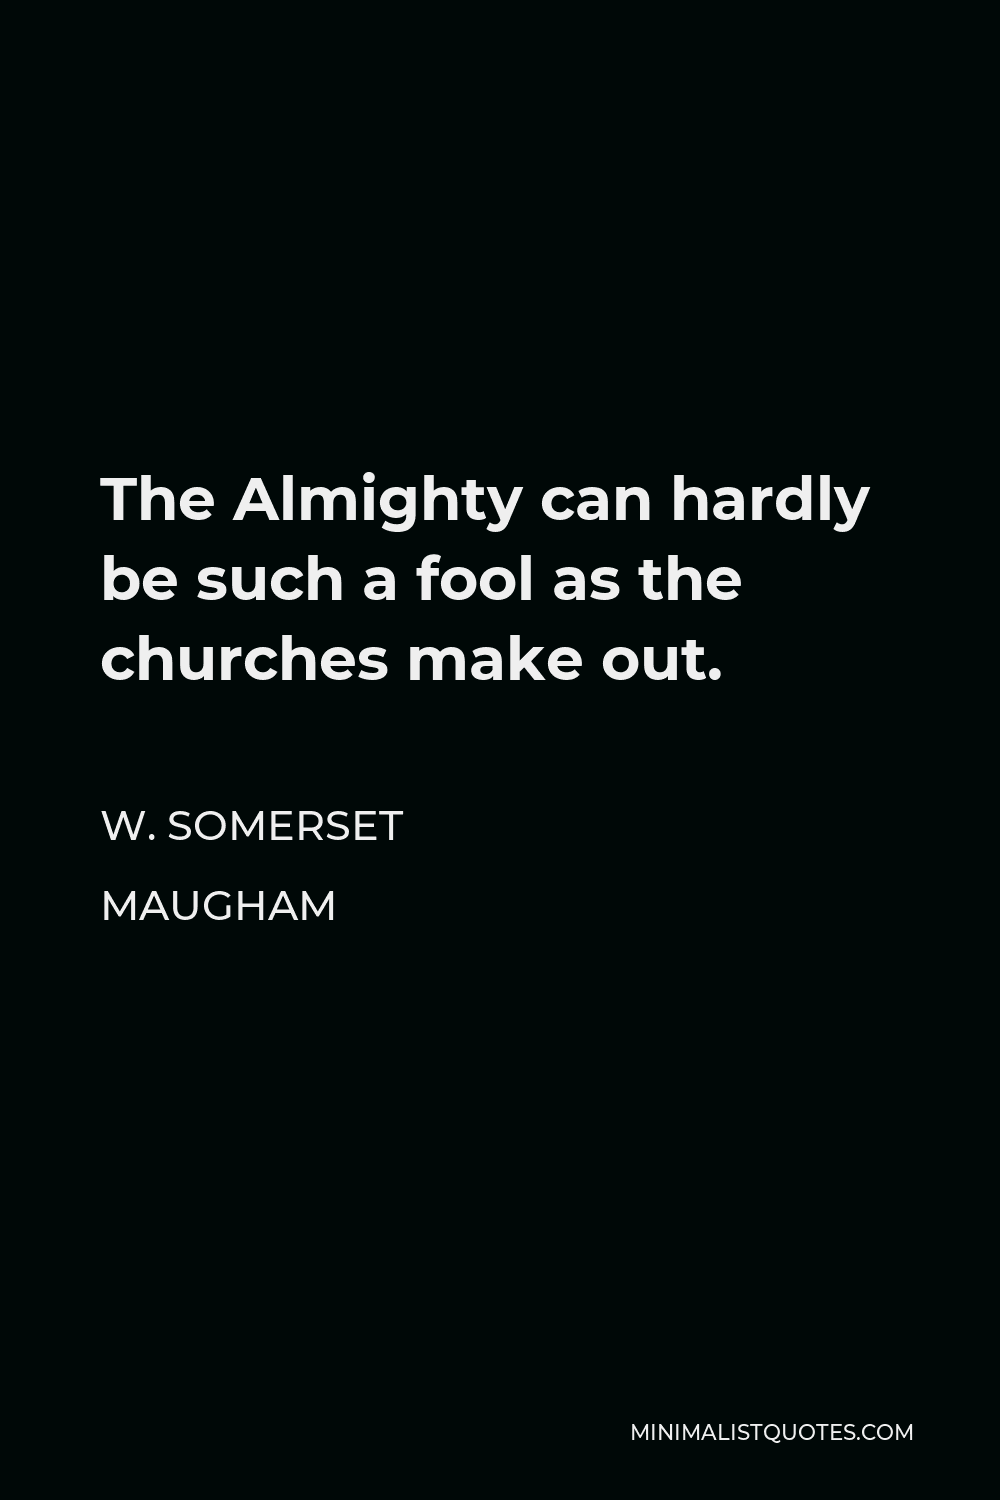 W. Somerset Maugham Quote - The Almighty can hardly be such a fool as the churches make out.